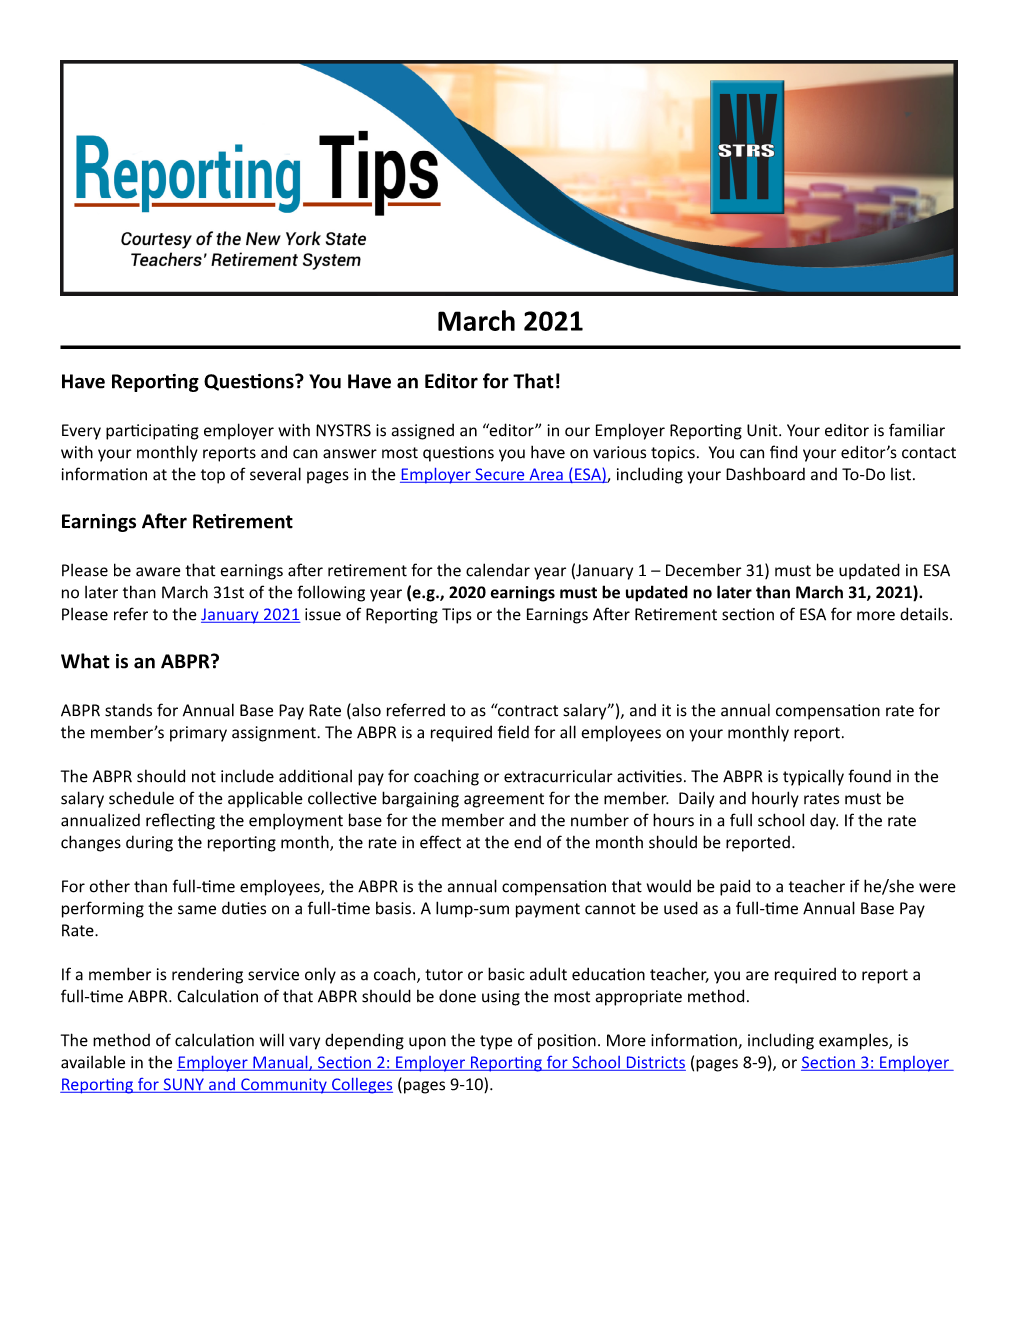 Reporting Tips: March 2021